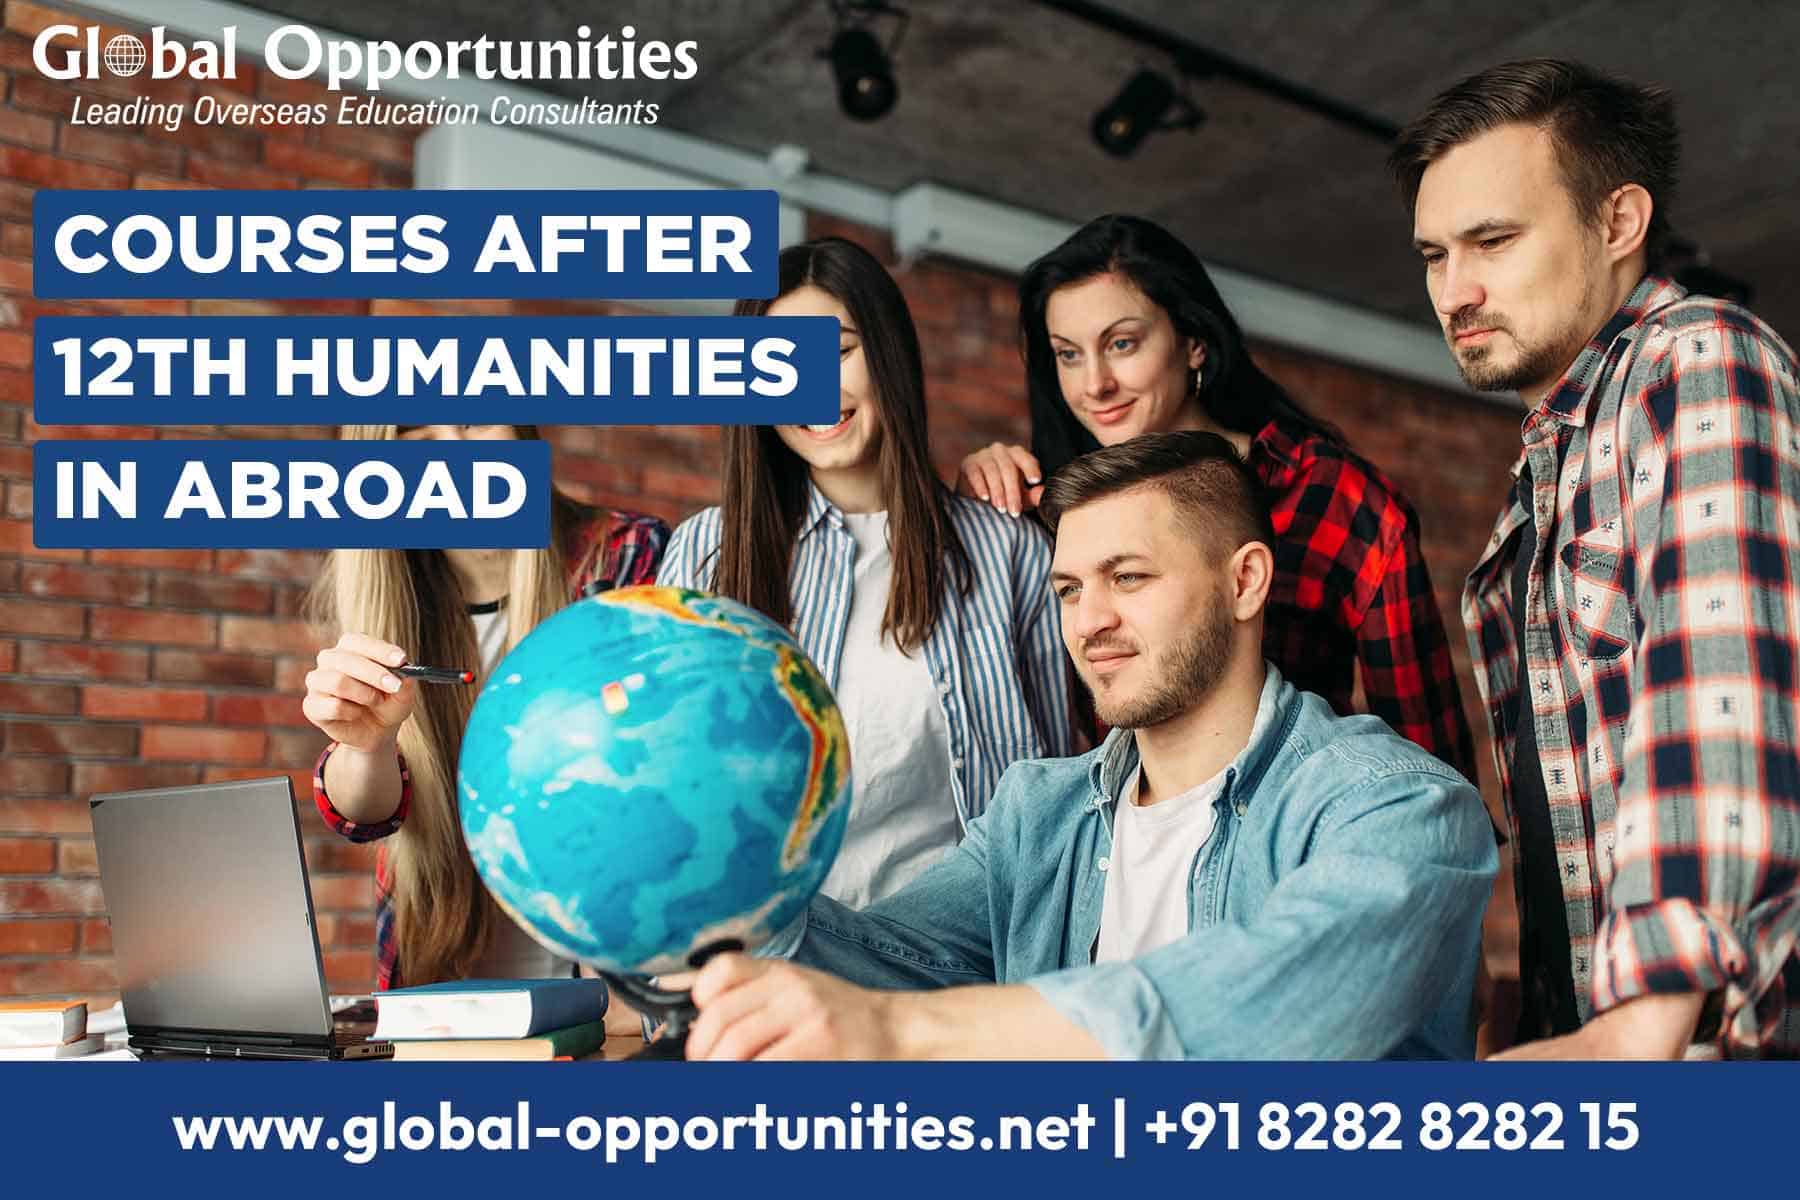 Courses After 12th Humanities in Abroad